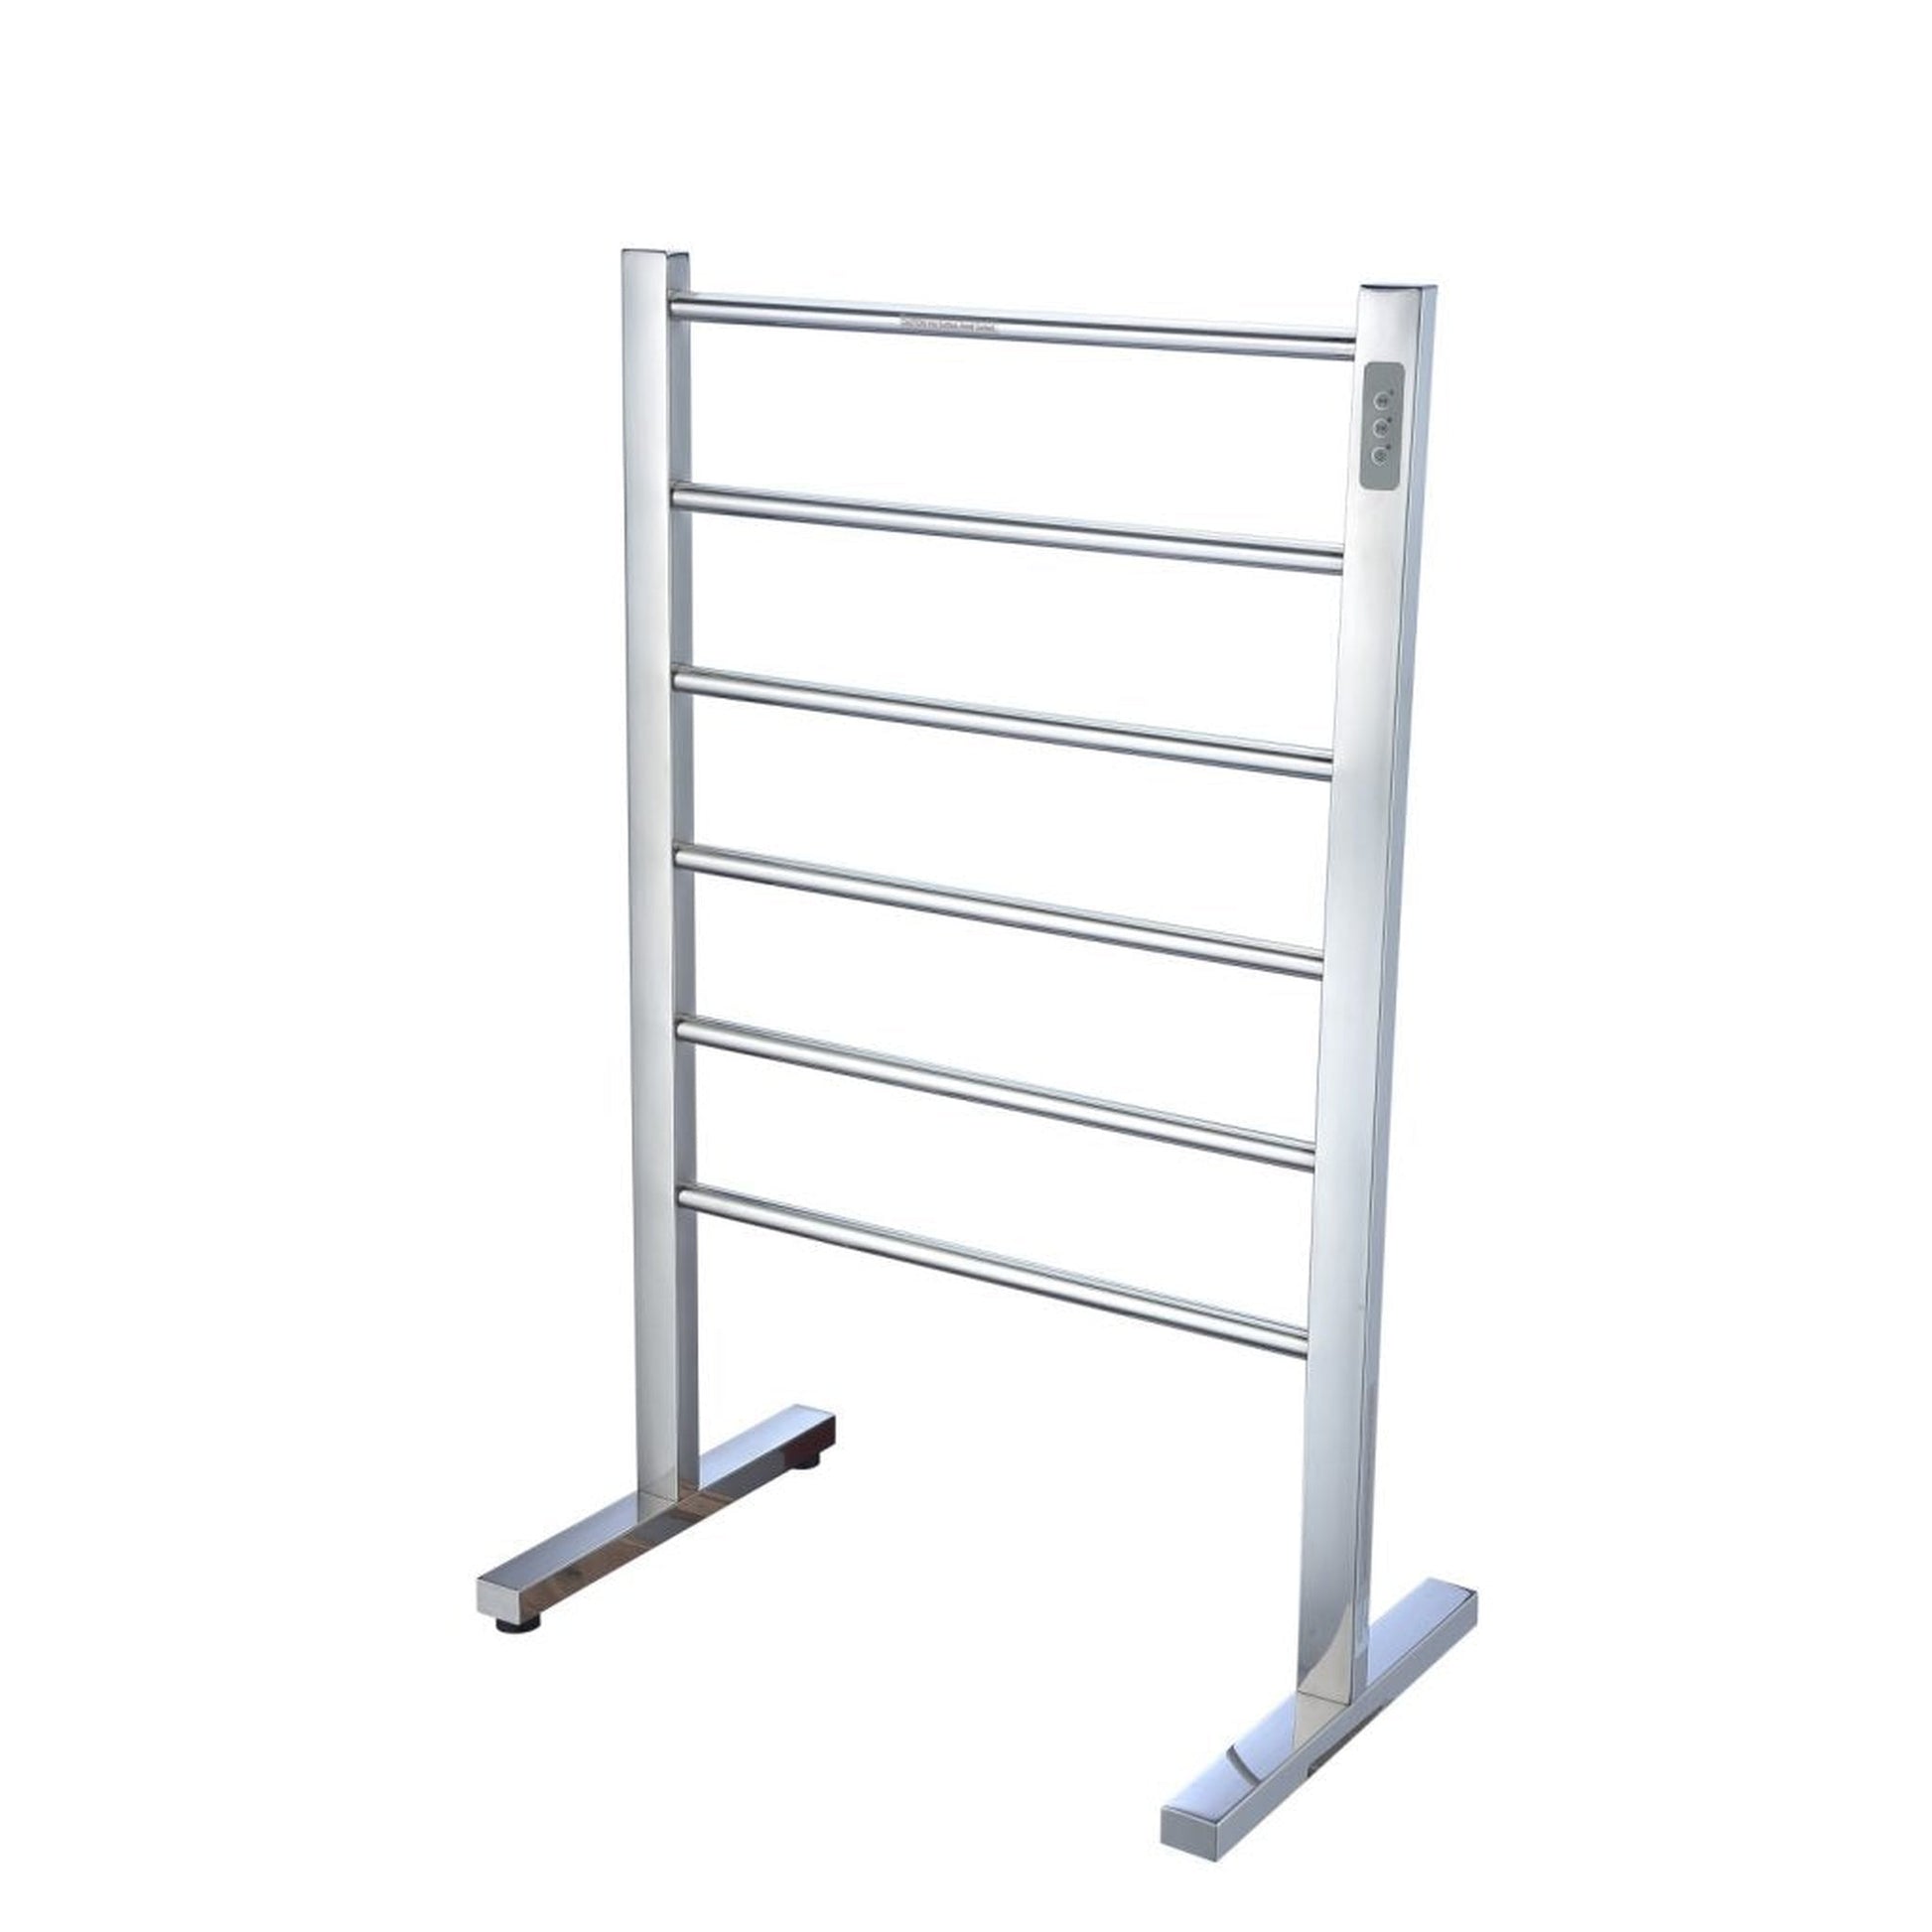 ANZZI Kiln Series 6-Bar Polished Chrome Stainless Steel Floor Mounted Electric Towel Warmer Rack